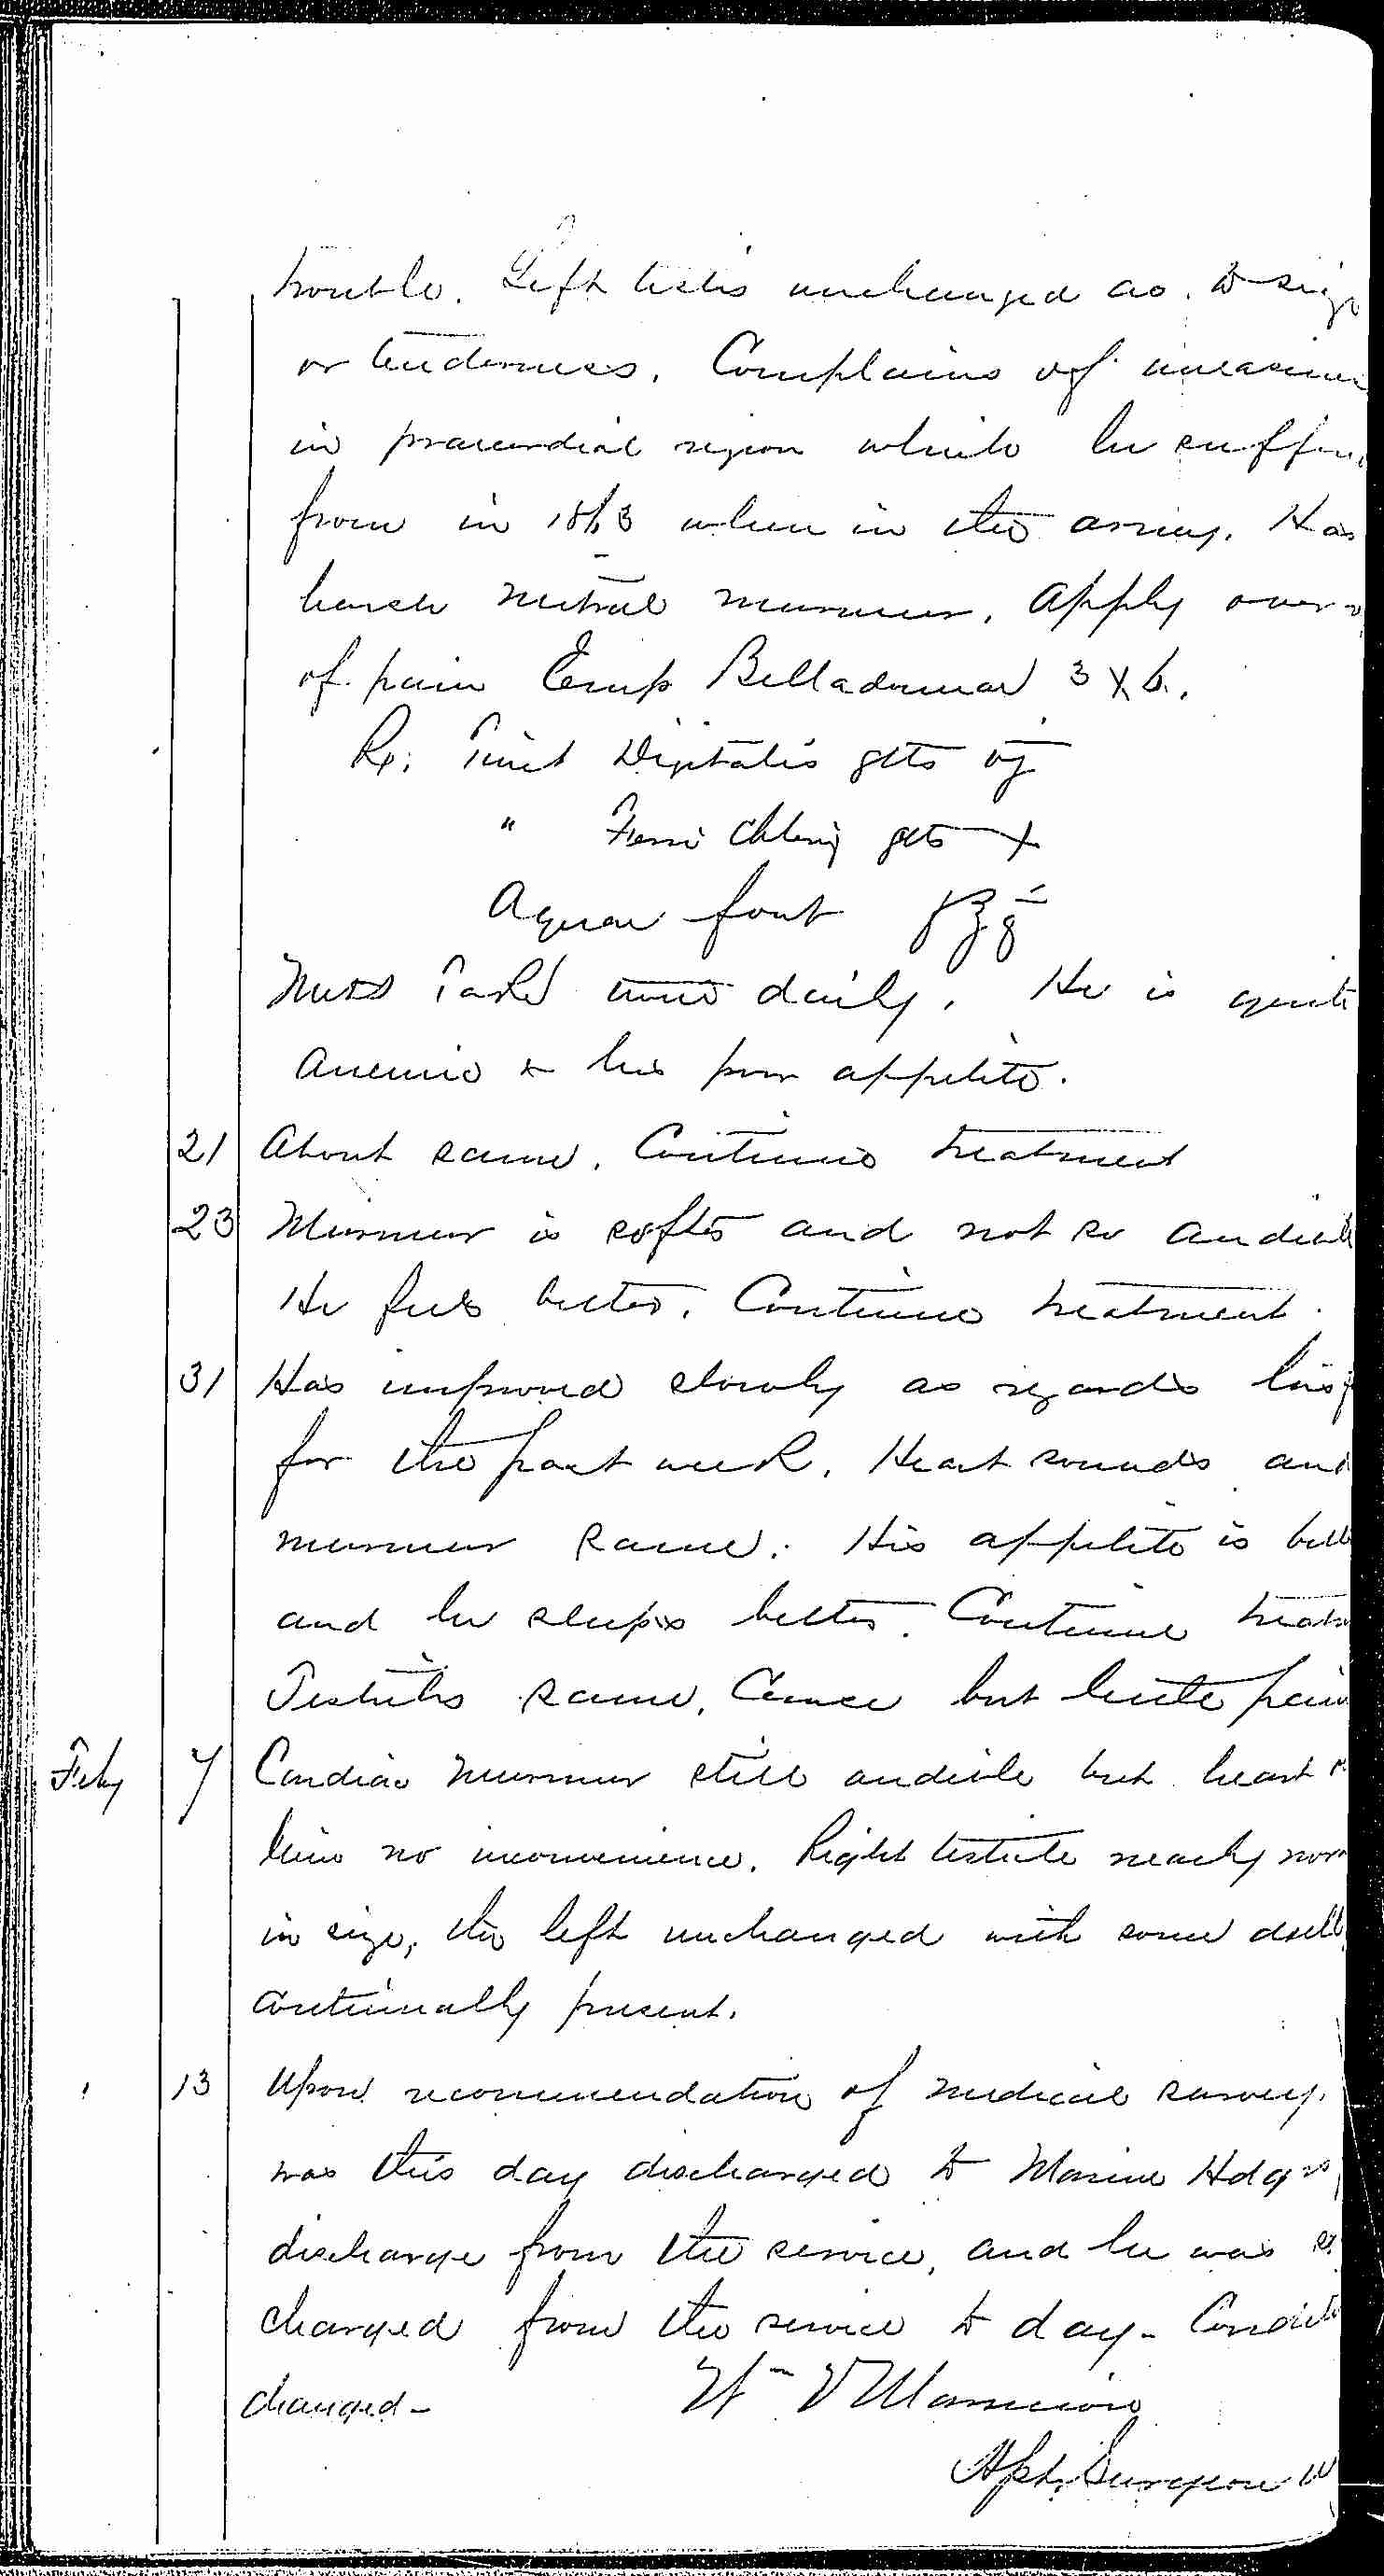 Entry for John C. Hutchinson (page 4 of 4) in the log Hospital Tickets and Case Papers - Naval Hospital - Washington, D.C. - 1868-69